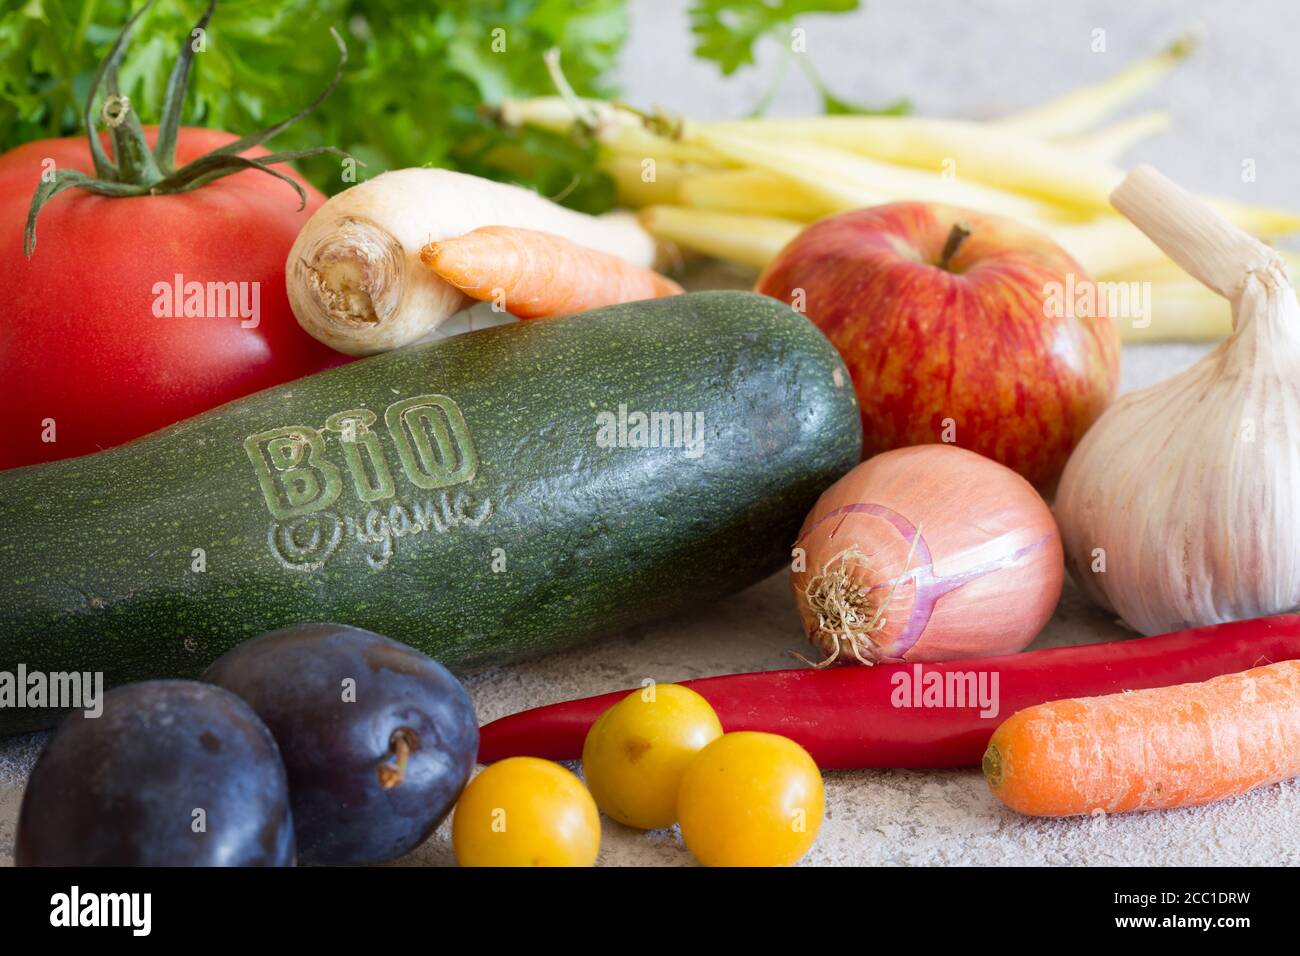 Bio organic vegetables and fruits, healthy food concept Stock Photo